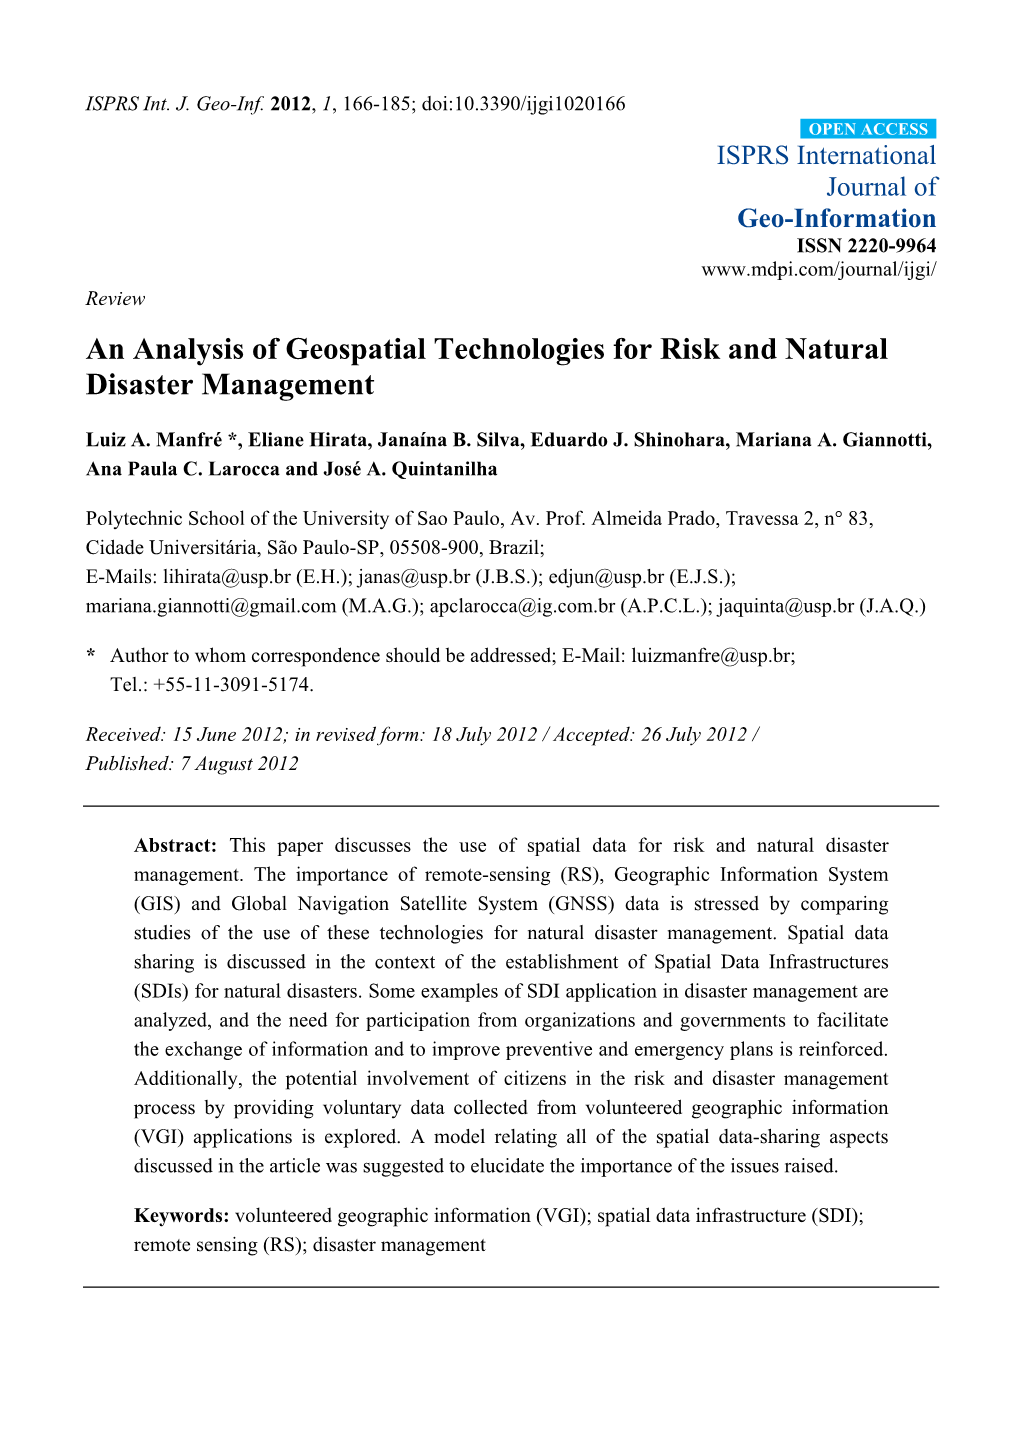 An Analysis of Geospatial Technologies for Risk and Natural Disaster Management